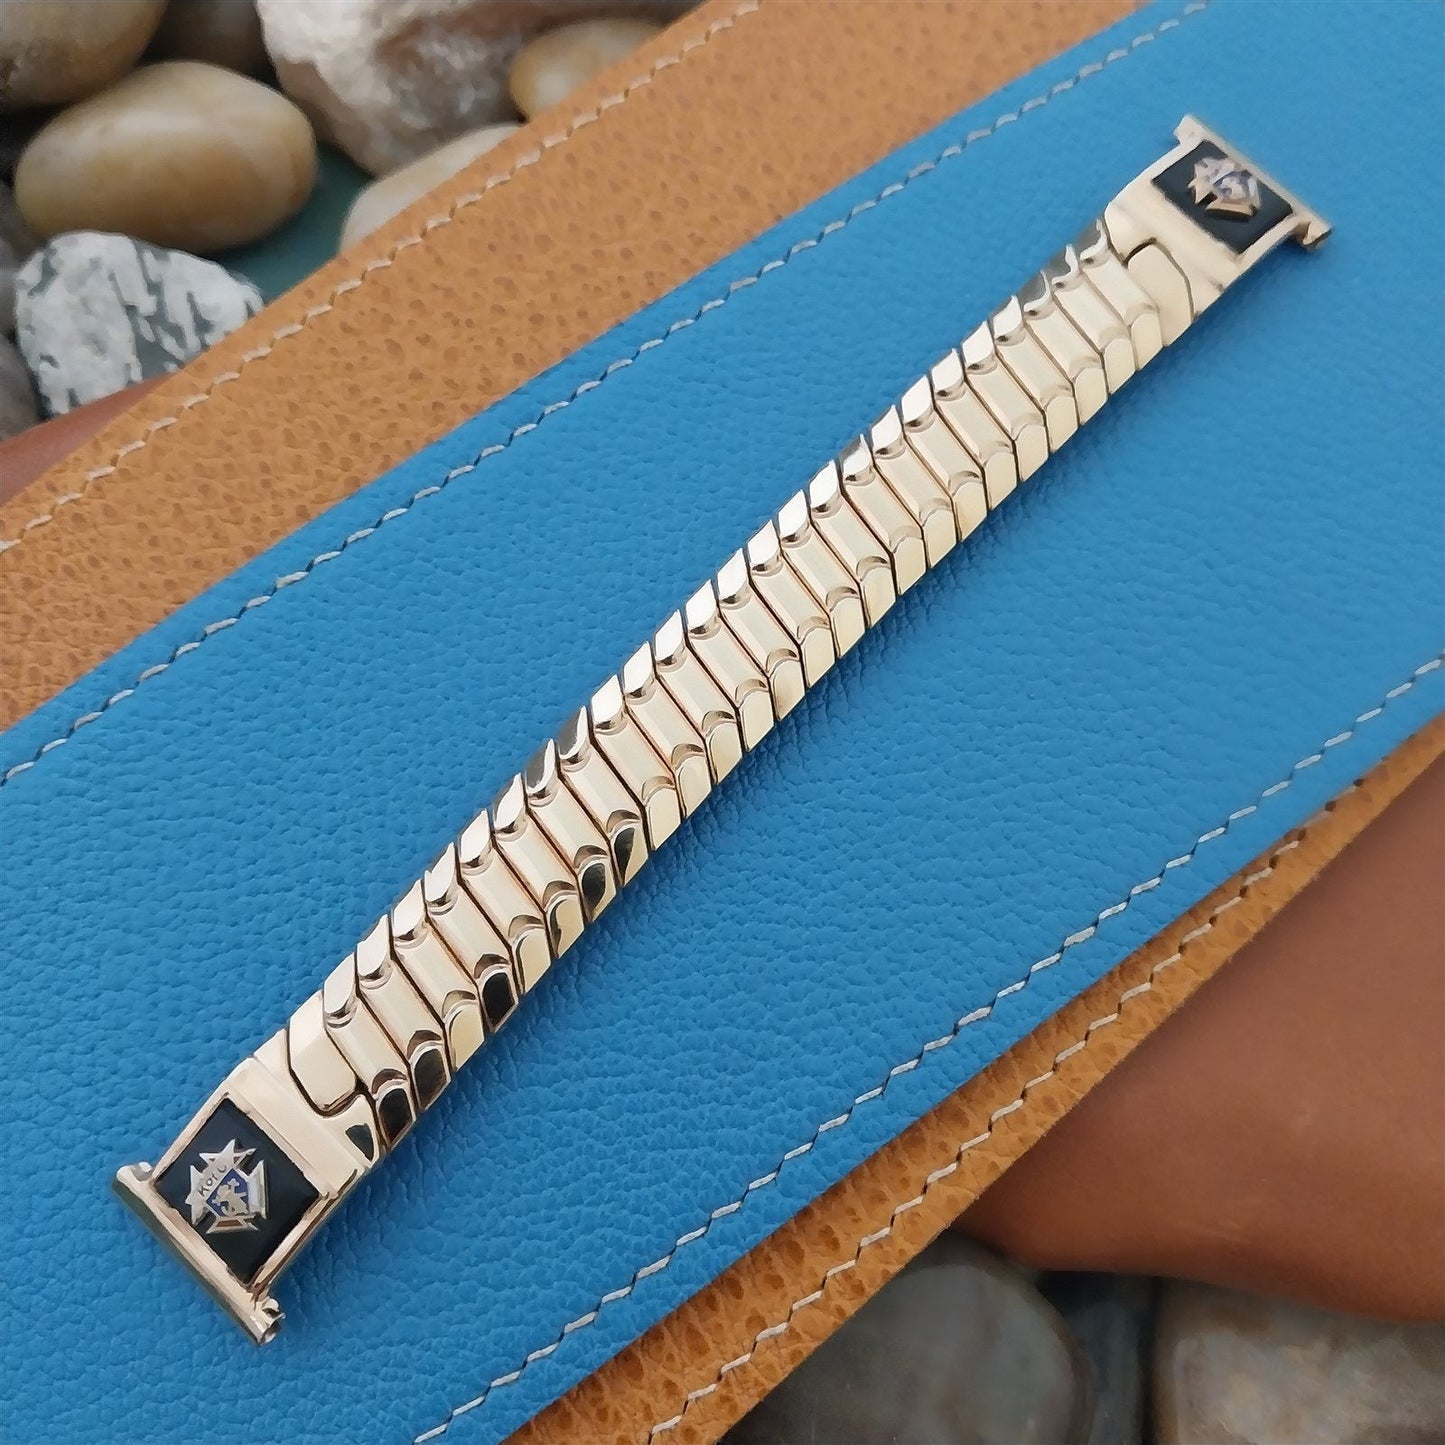 Knights of Columbus 1940s Marvel 12K Gold-Filled Unused Vintage Watch Band